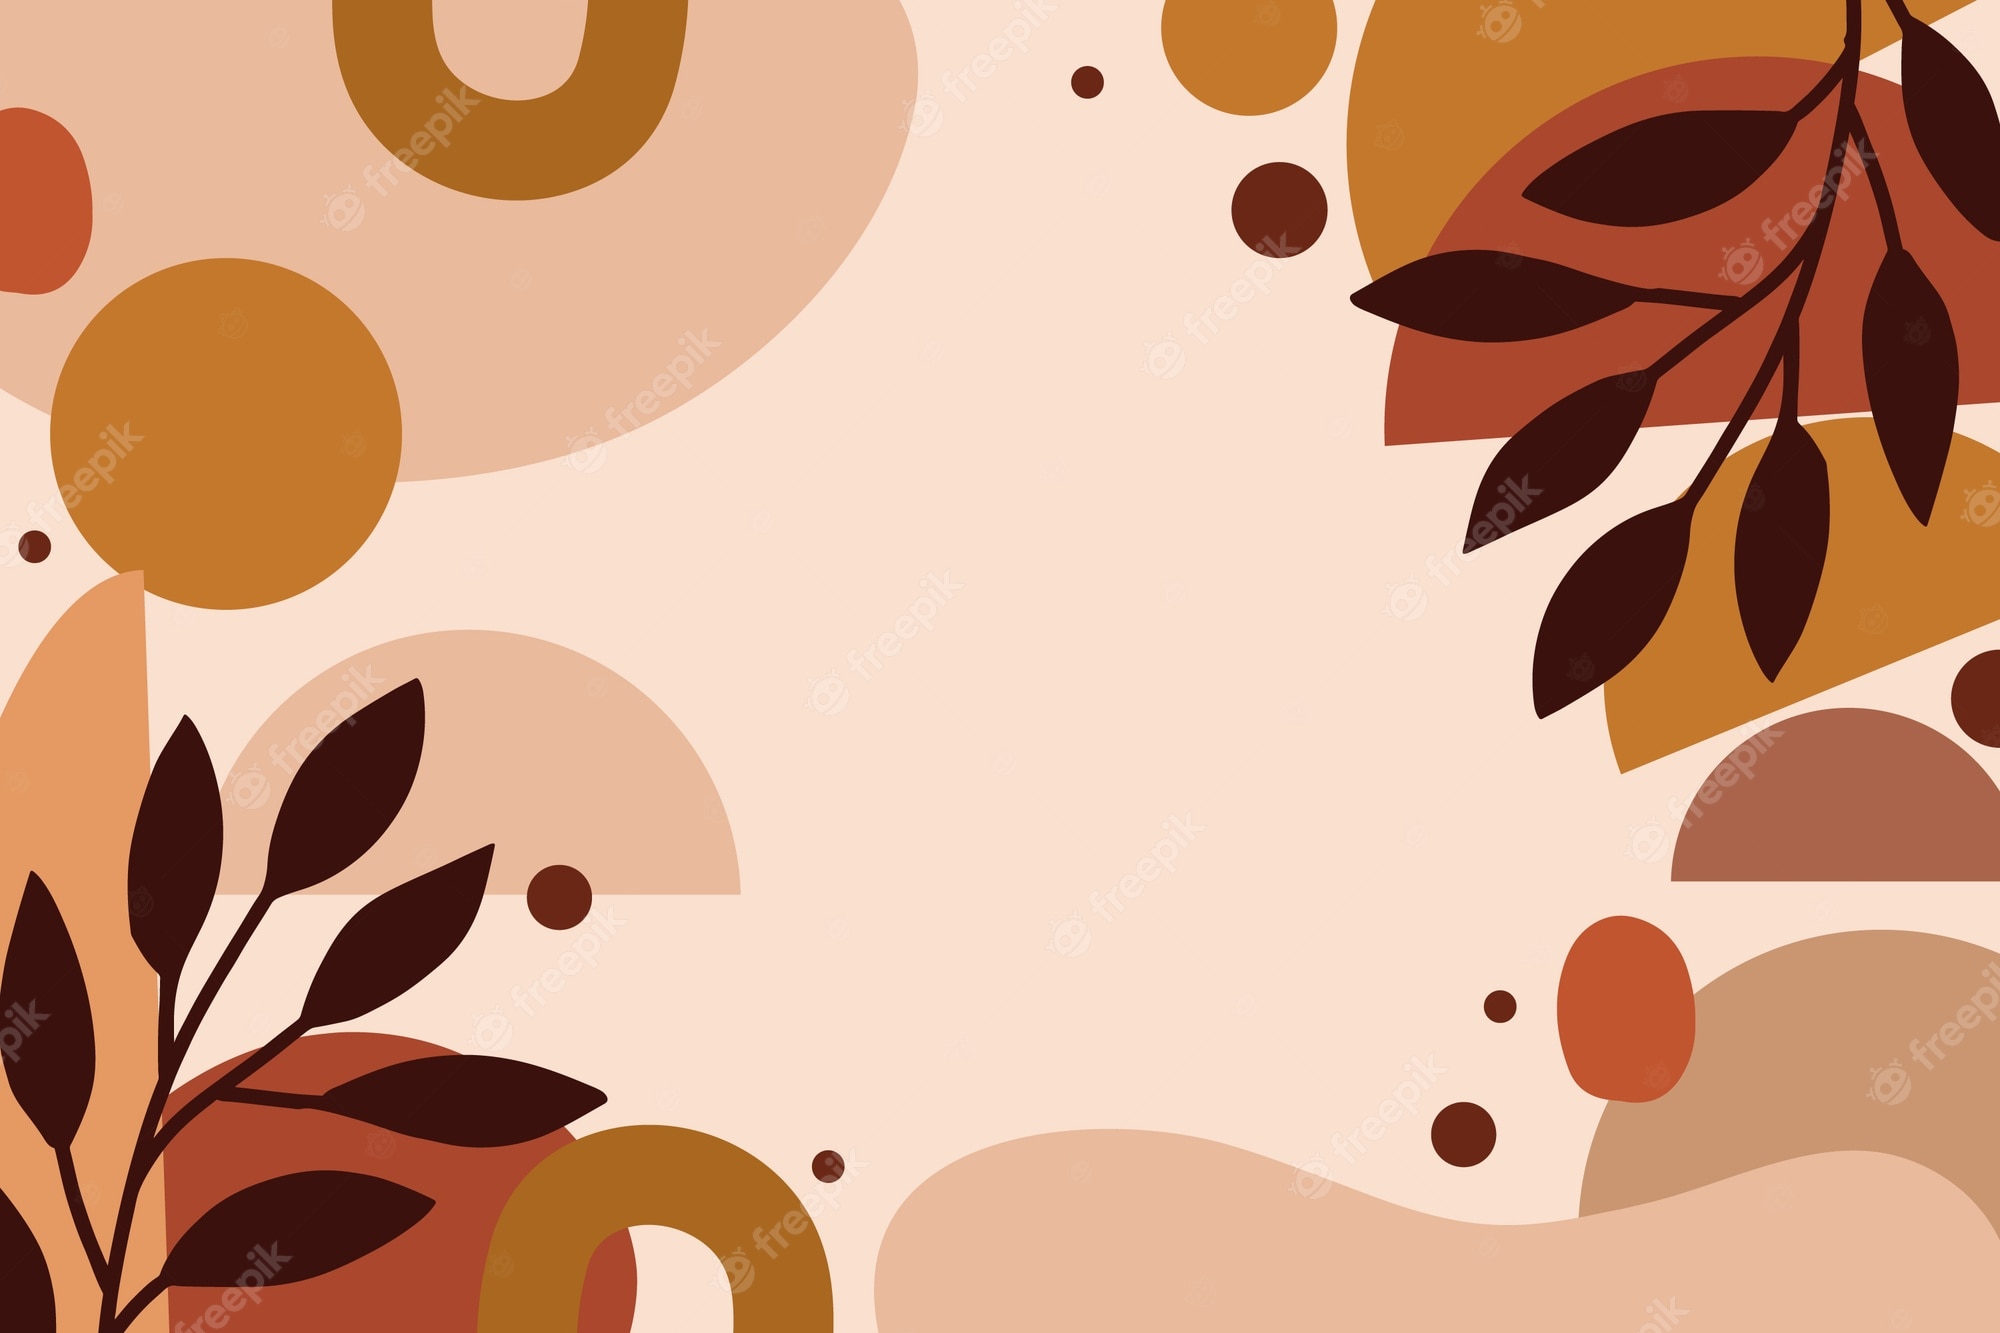 An abstract design with autumnal colors - Terracotta